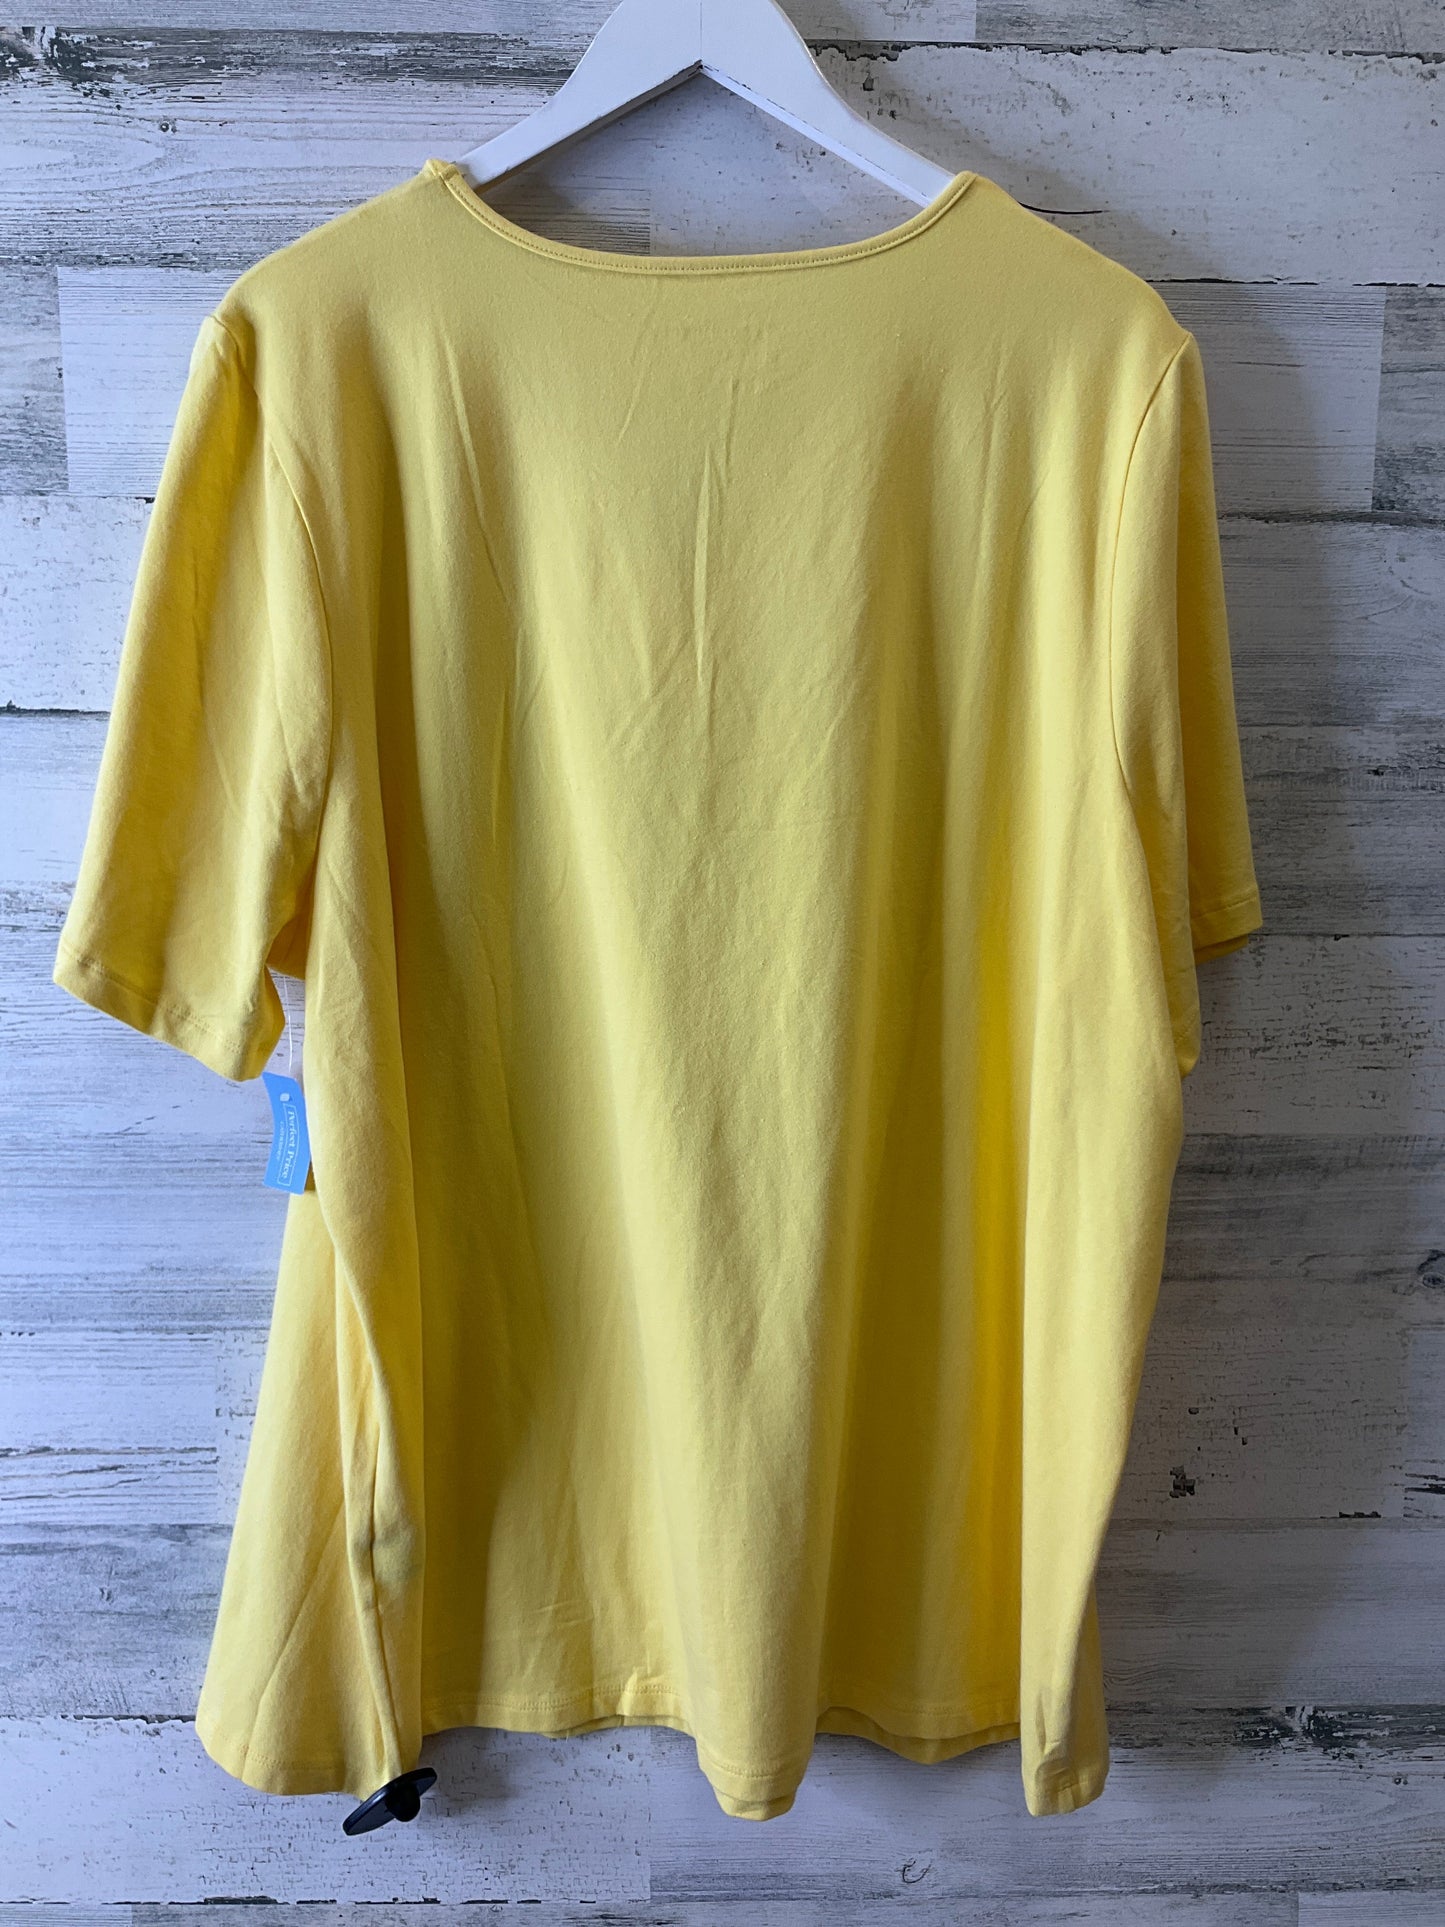 Yellow Top Short Sleeve Catherines, Size 2x